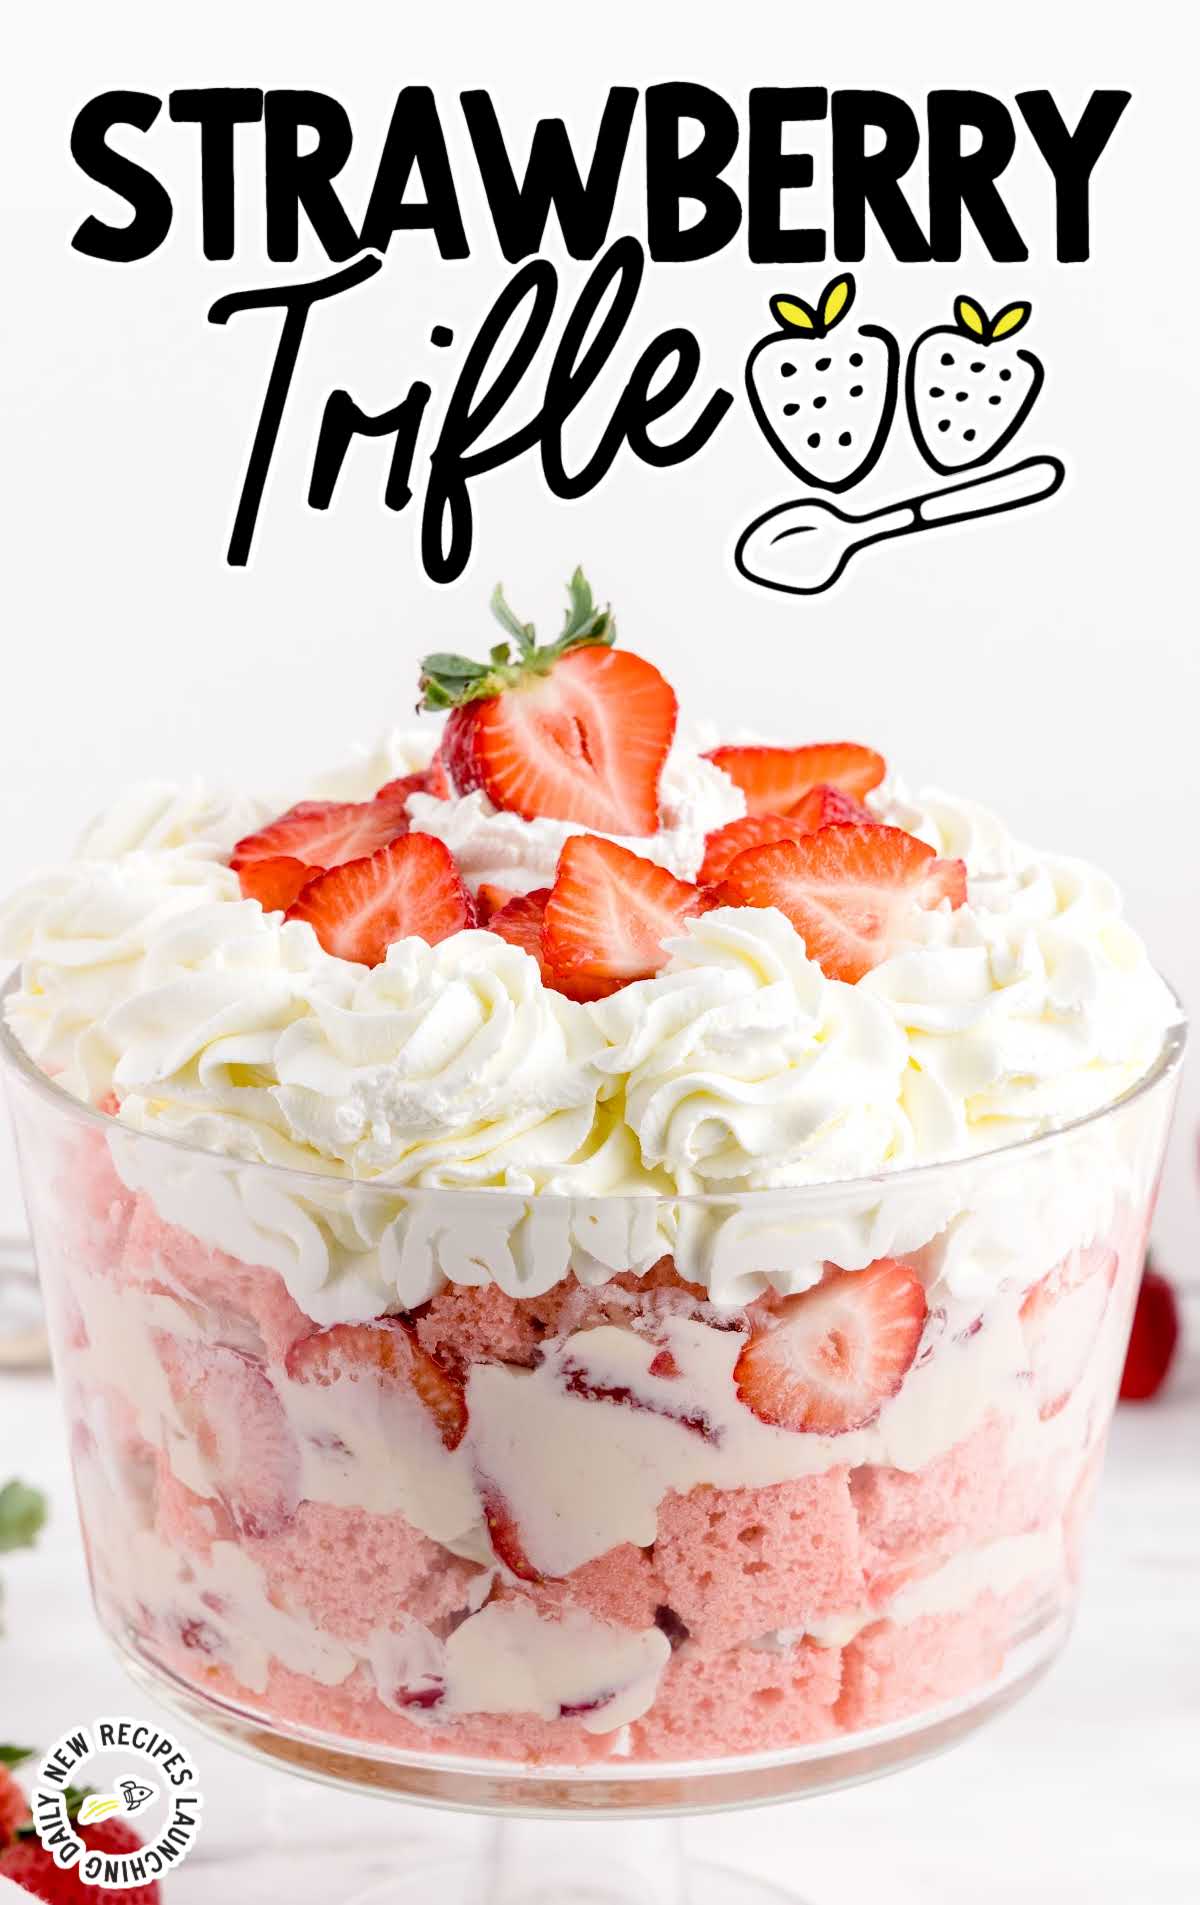 close up shot of a big serving bowl of trifle topped with chopped strawberries